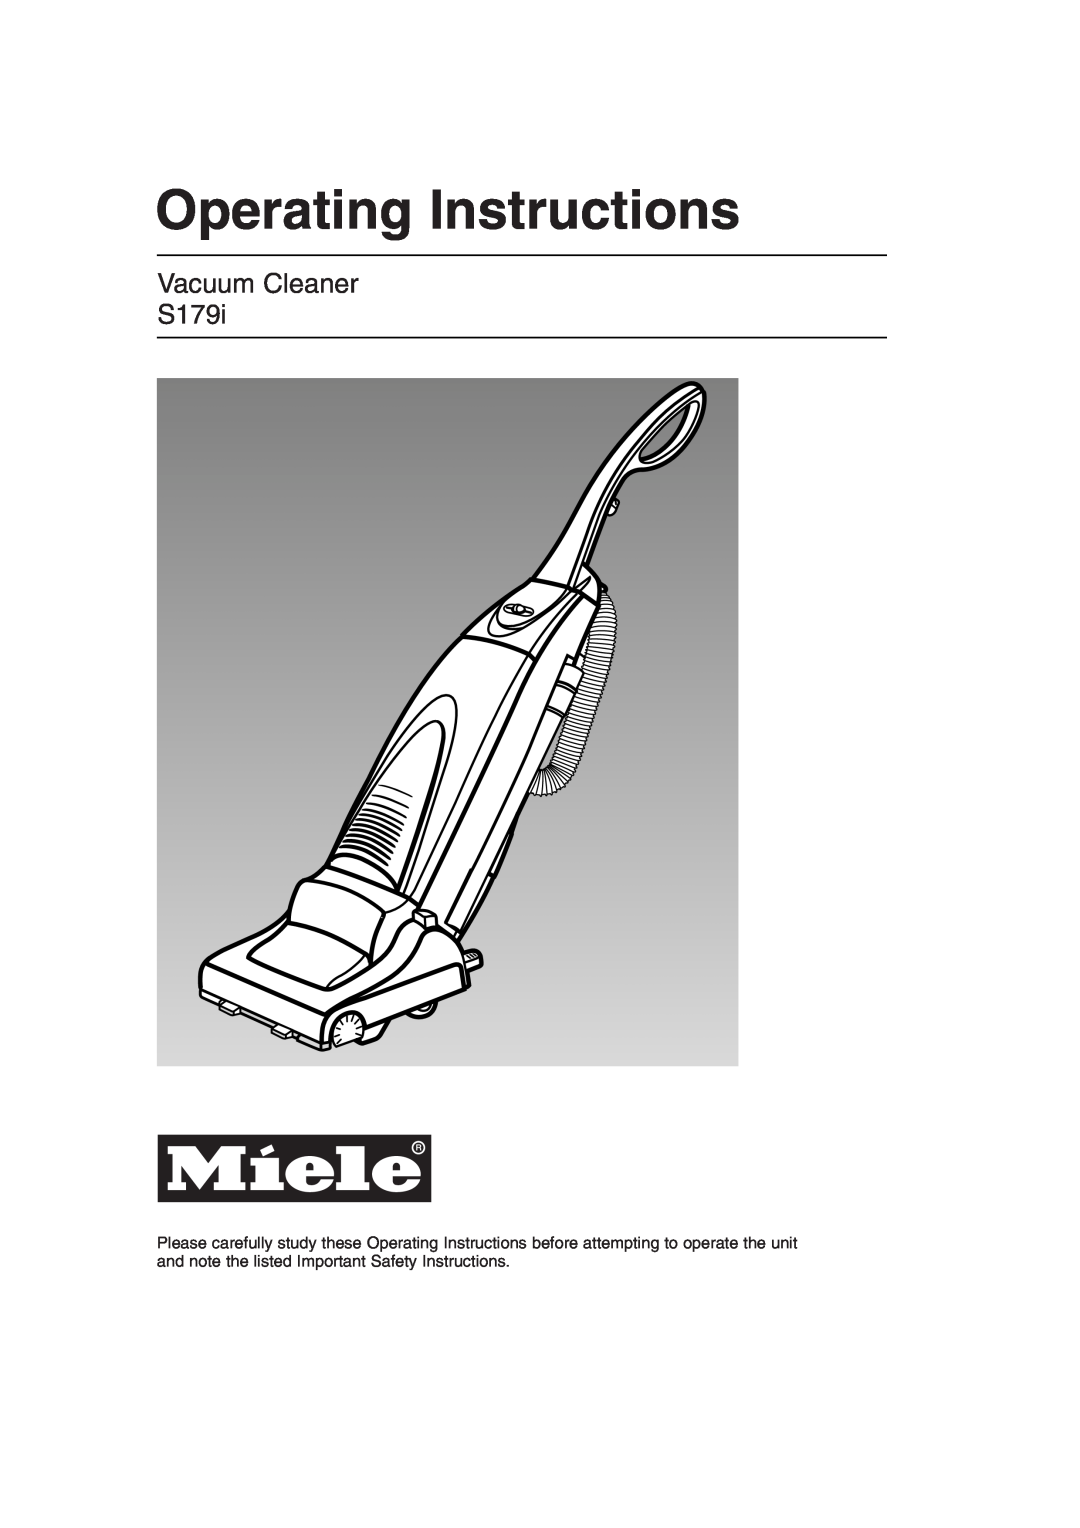 Miele important safety instructions Operating Instructions, Vacuum Cleaner S179i 